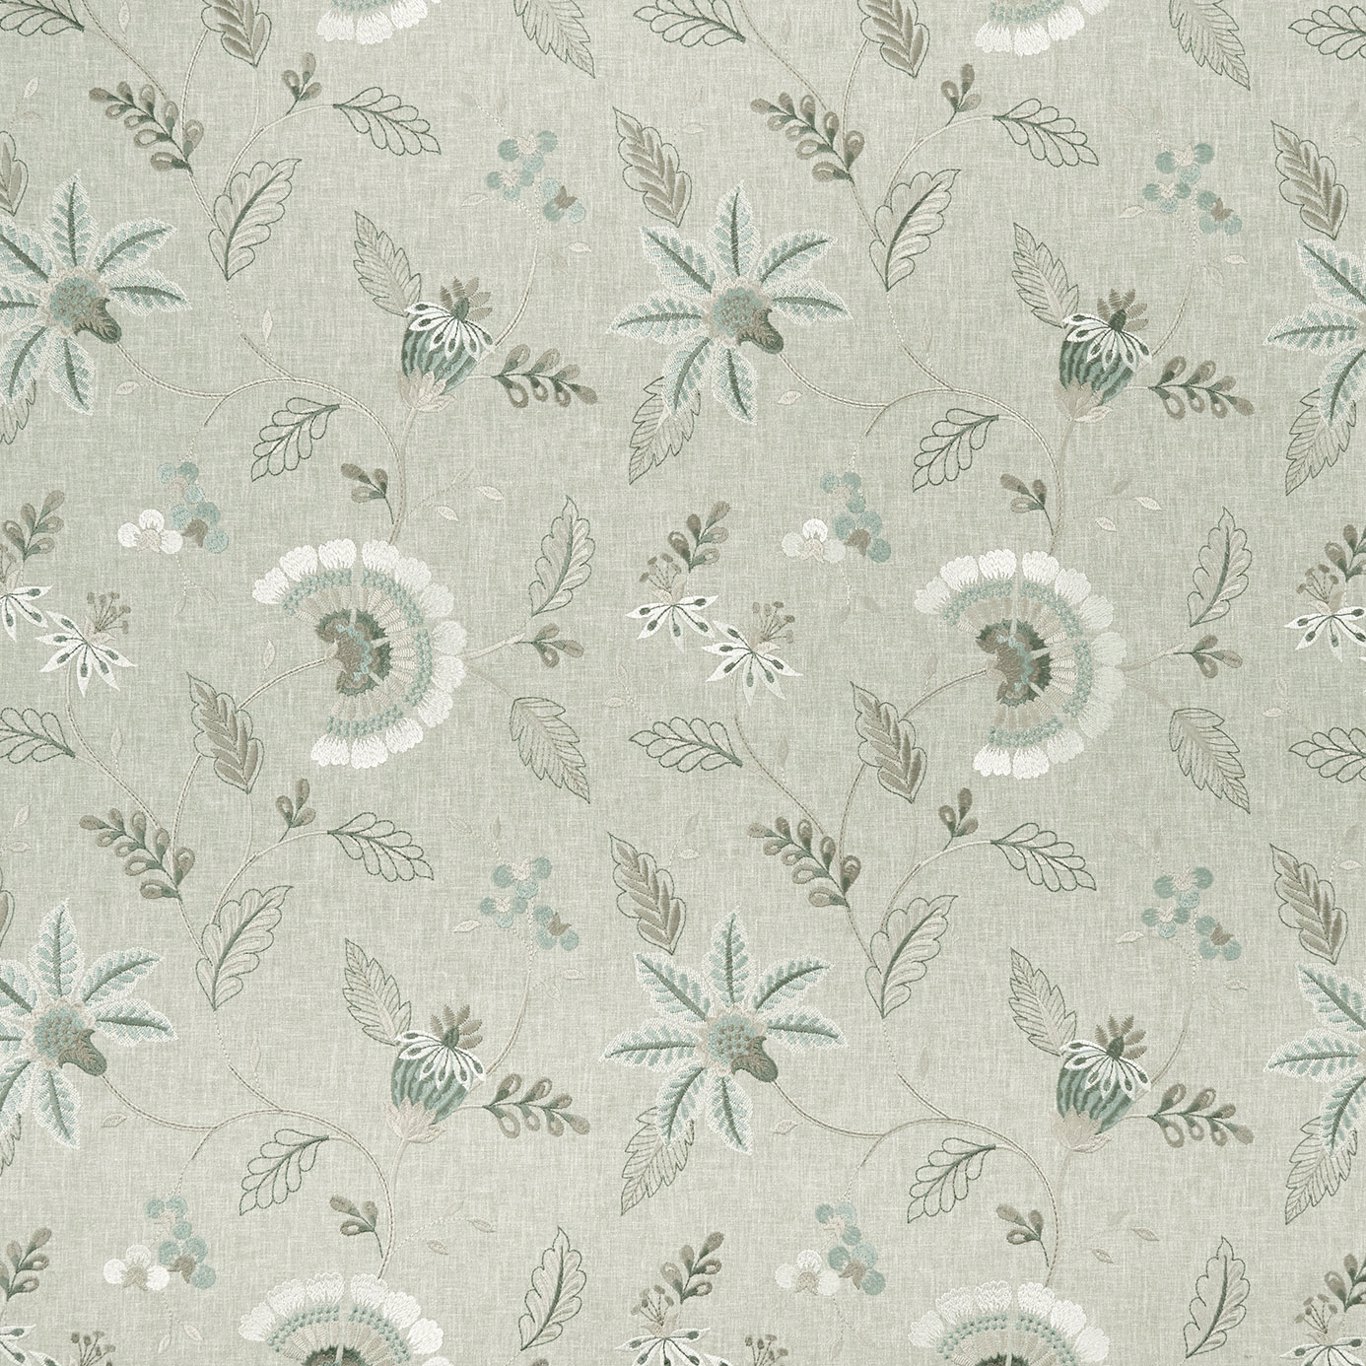 Delamere Duckegg Fabric by CNC